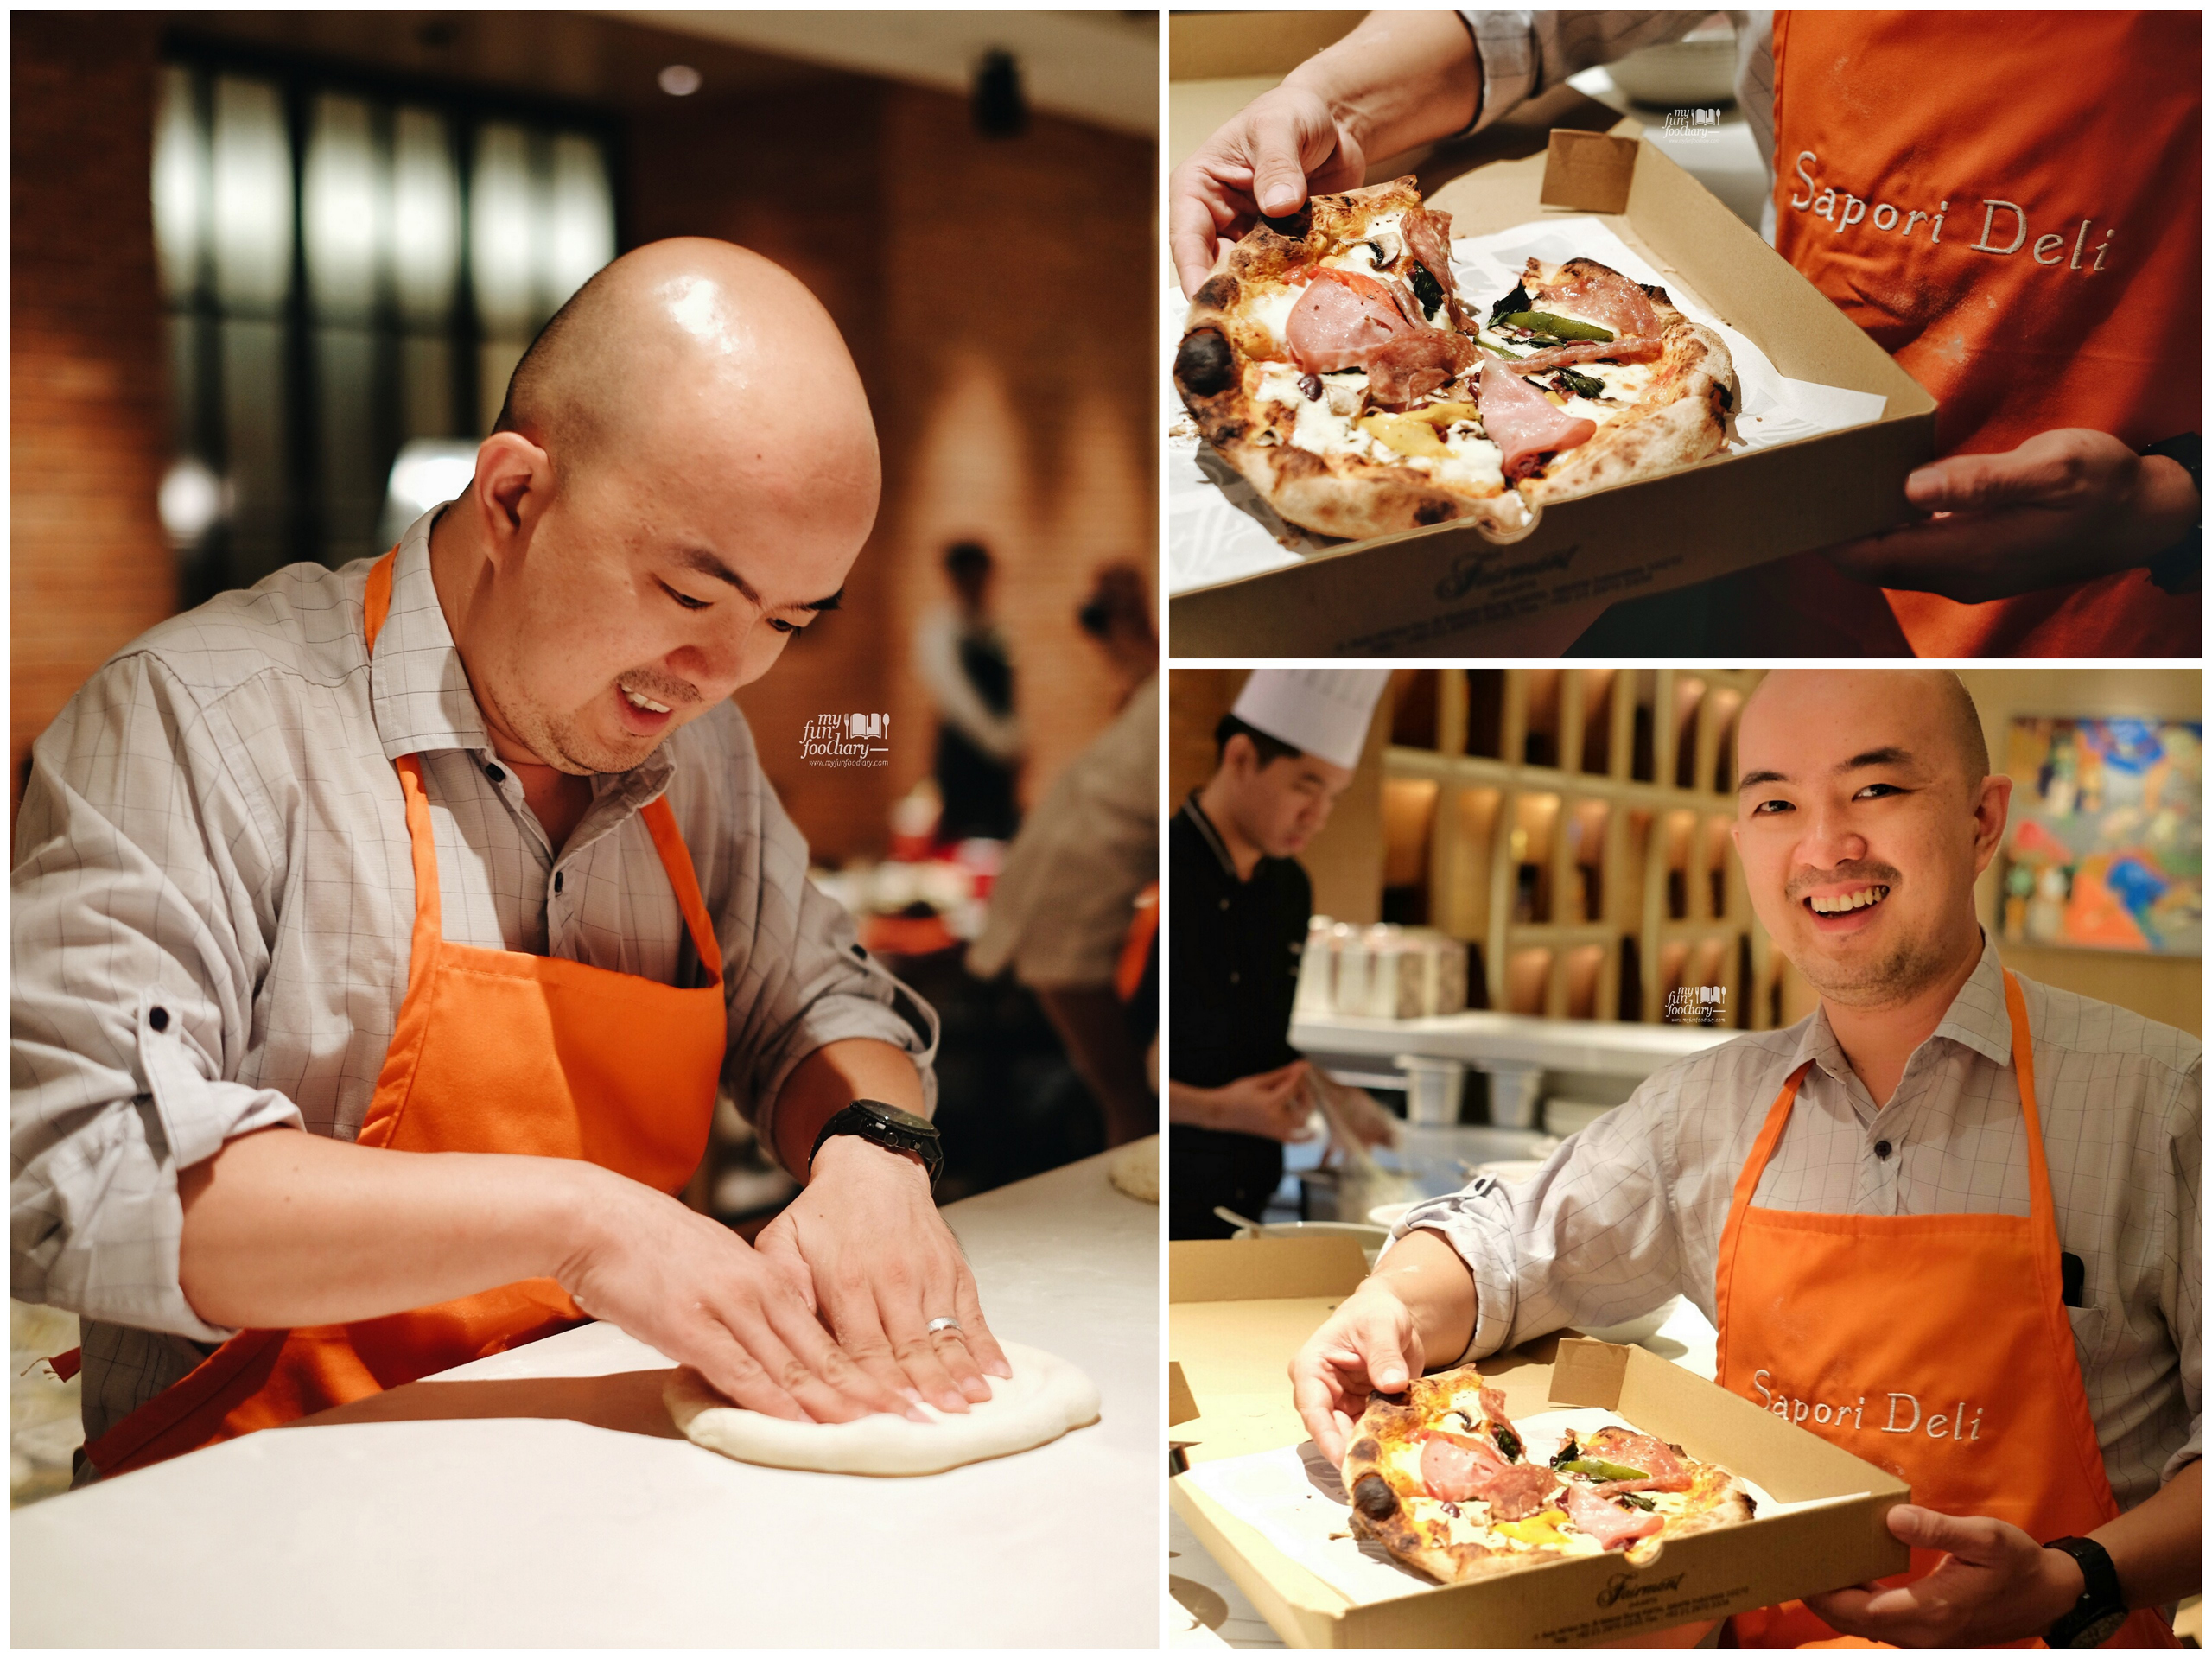 My husband Andy Handoko with his Pizza creation at Sapori Deli by Myfunfoodiary